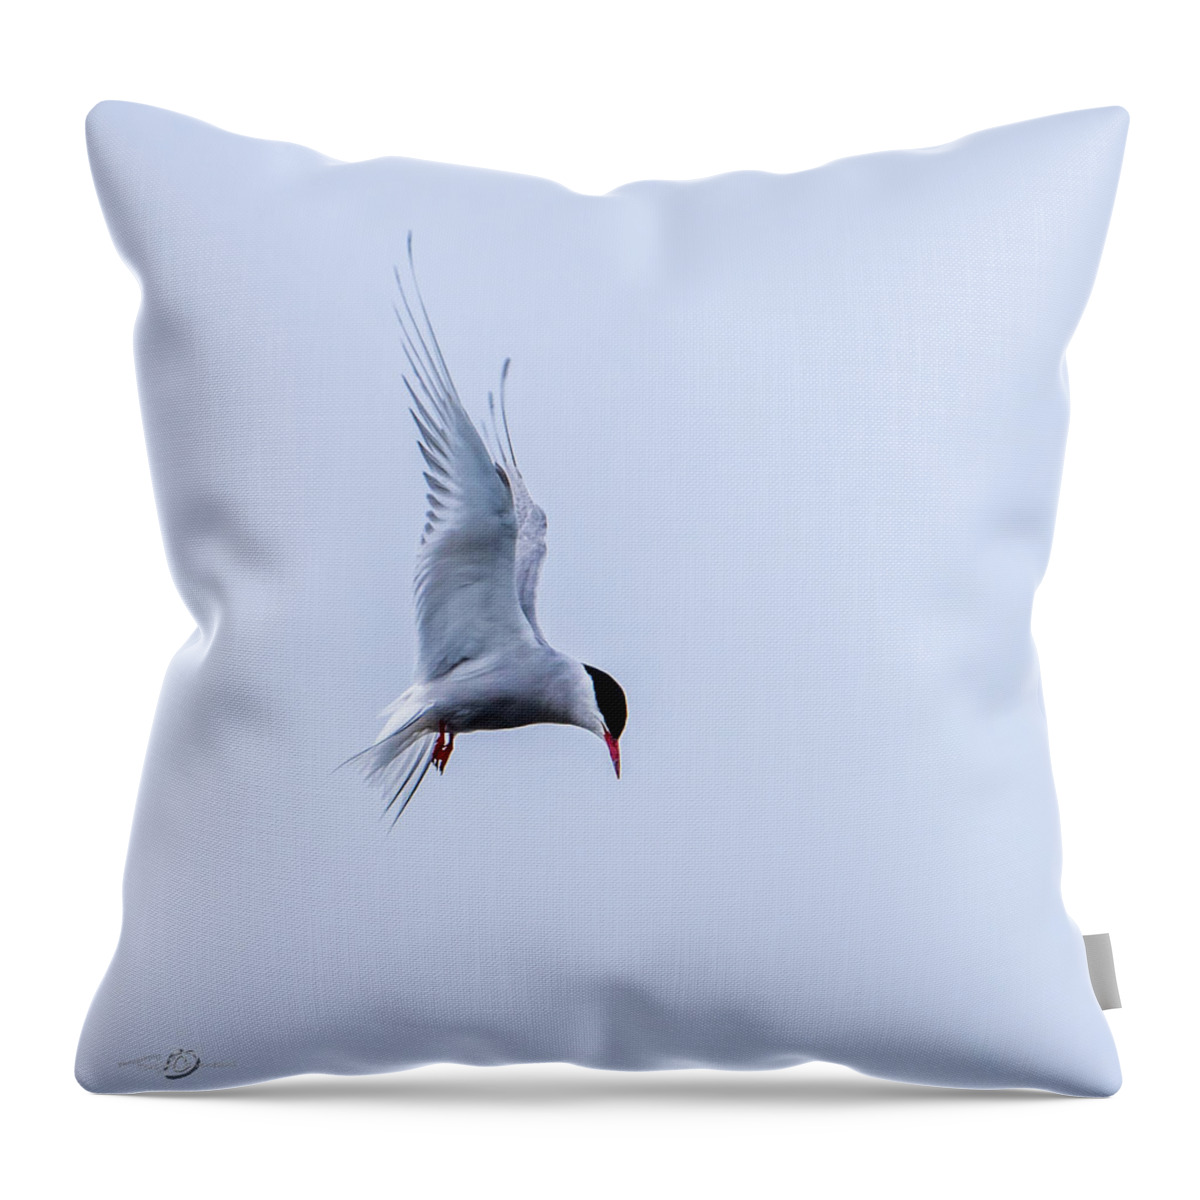 Hovering Arctric Tern Throw Pillow featuring the photograph Hovering Arctic Tern by Torbjorn Swenelius